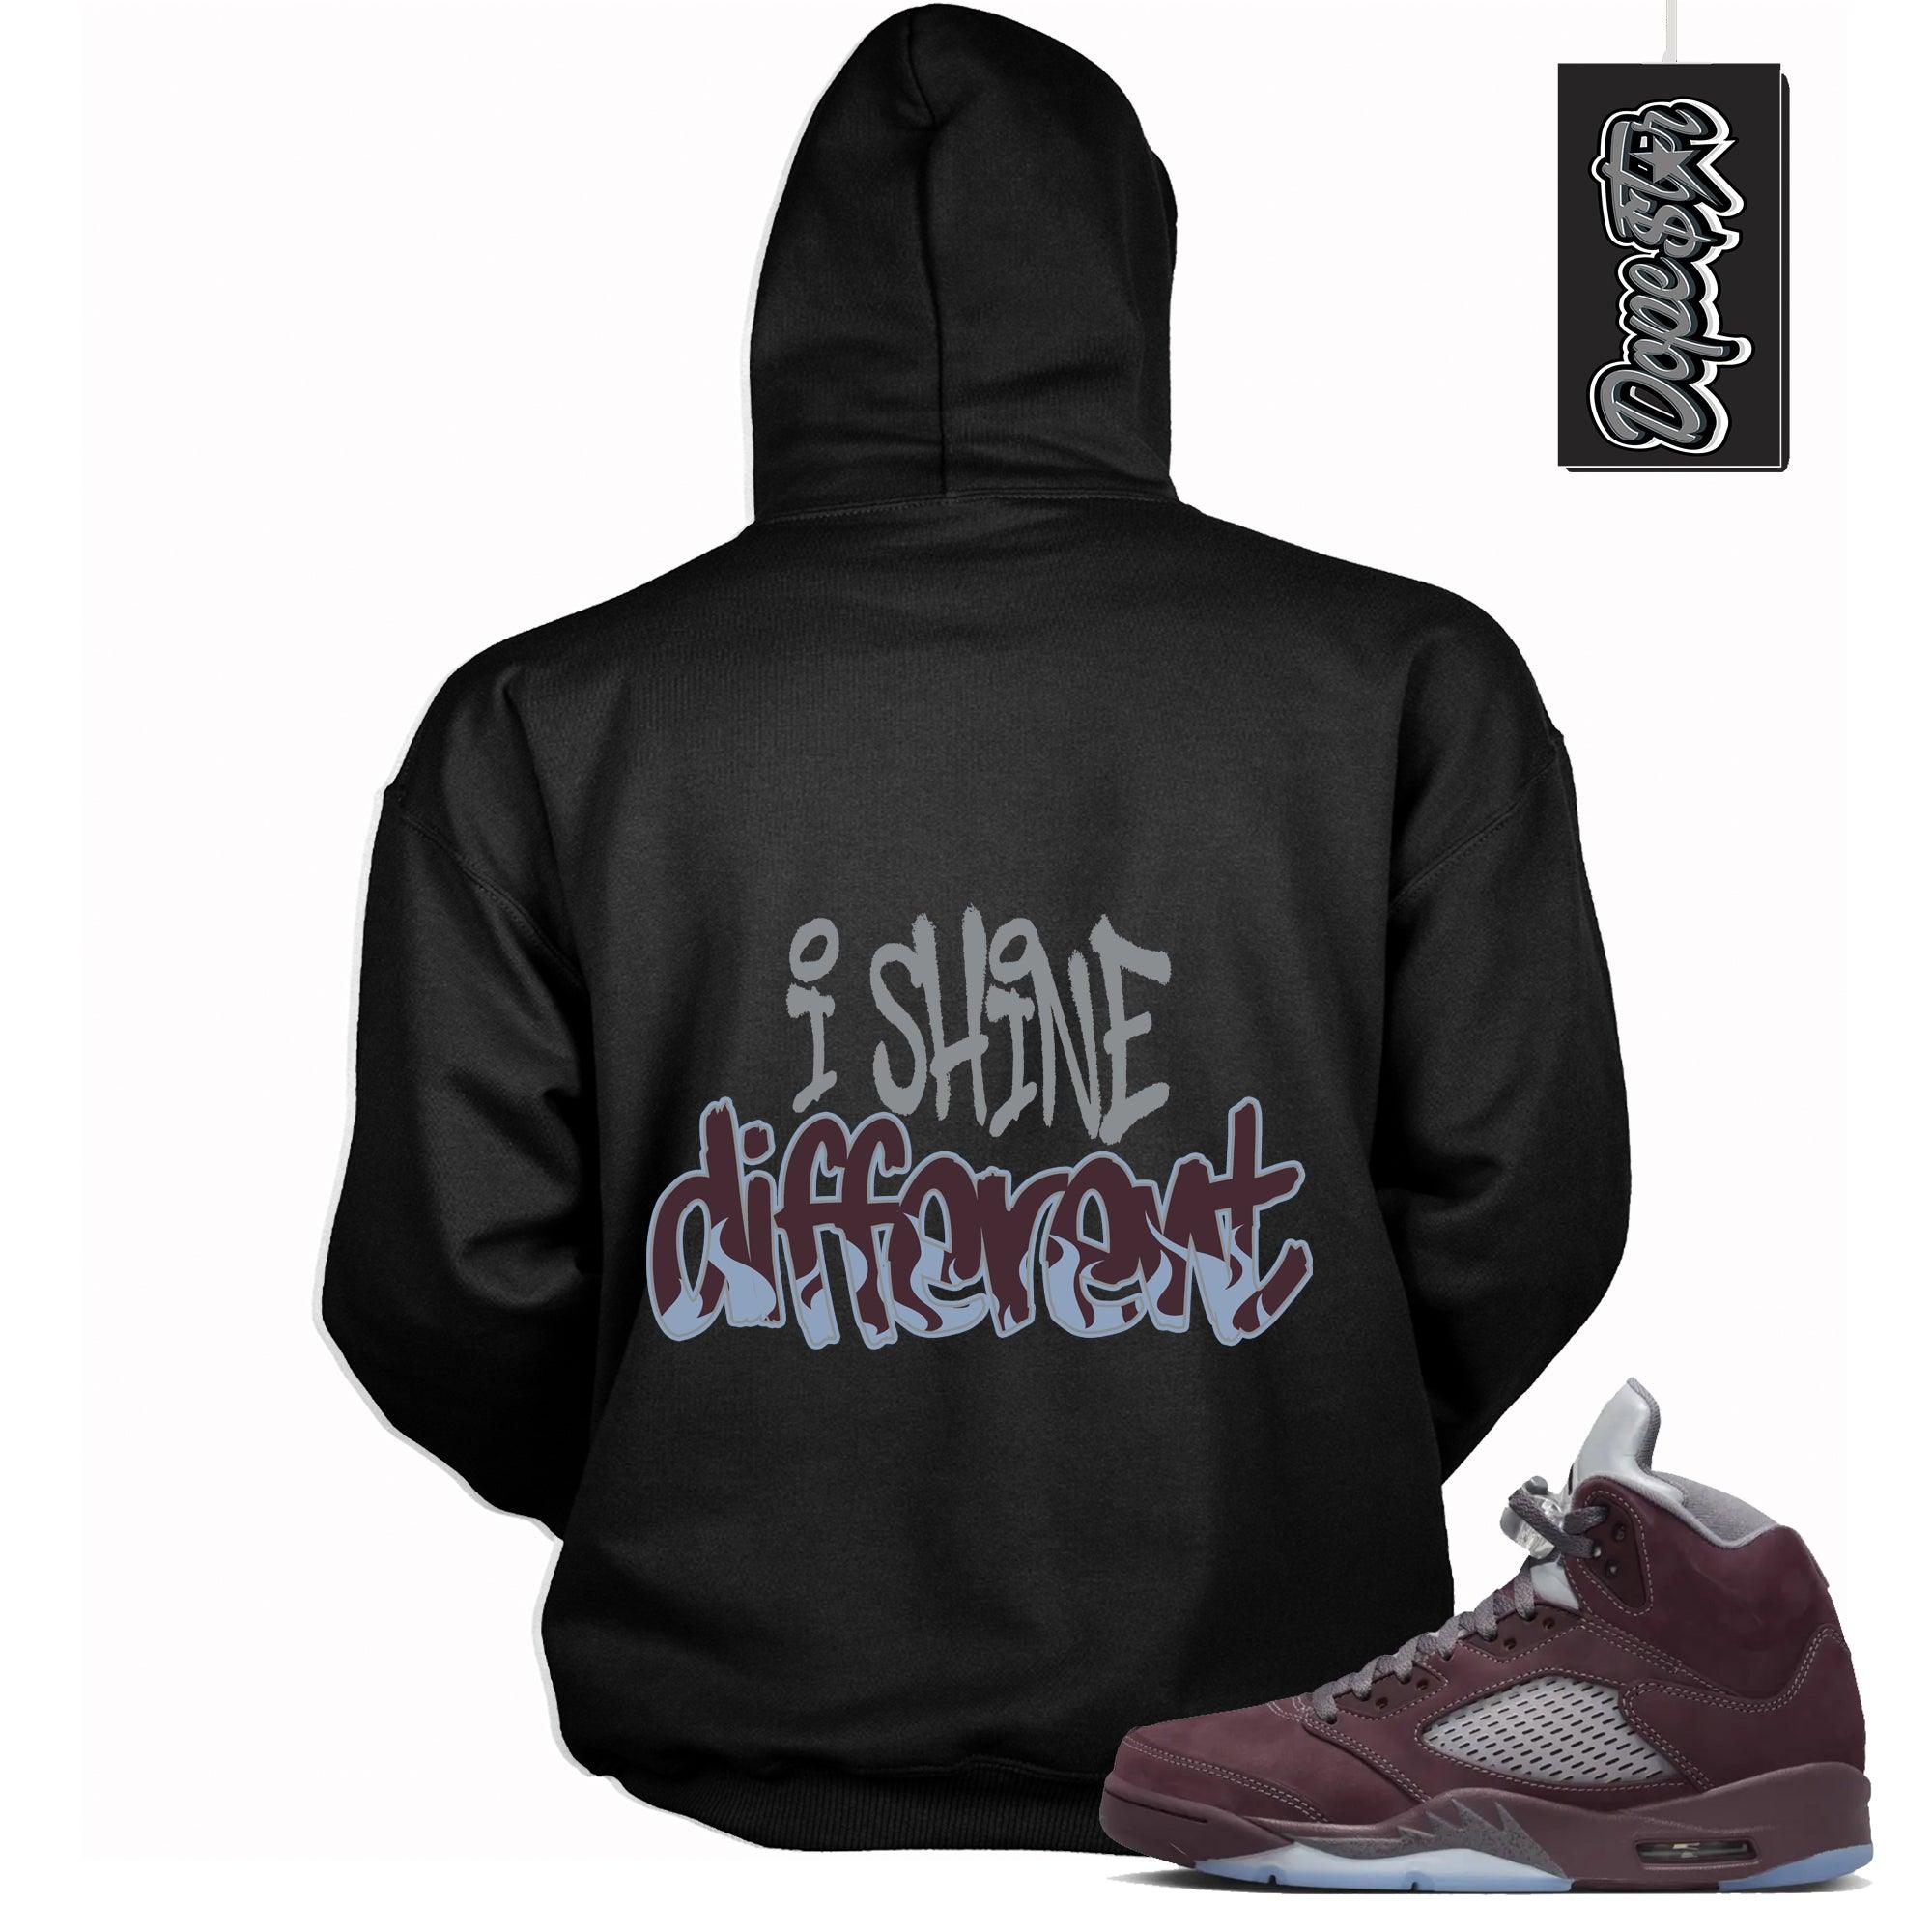 Cool Black Graphic Hoodie with “  I Shine Different  “ print, that perfectly matches Air Jordan 5 Burgundy 2023 sneakers